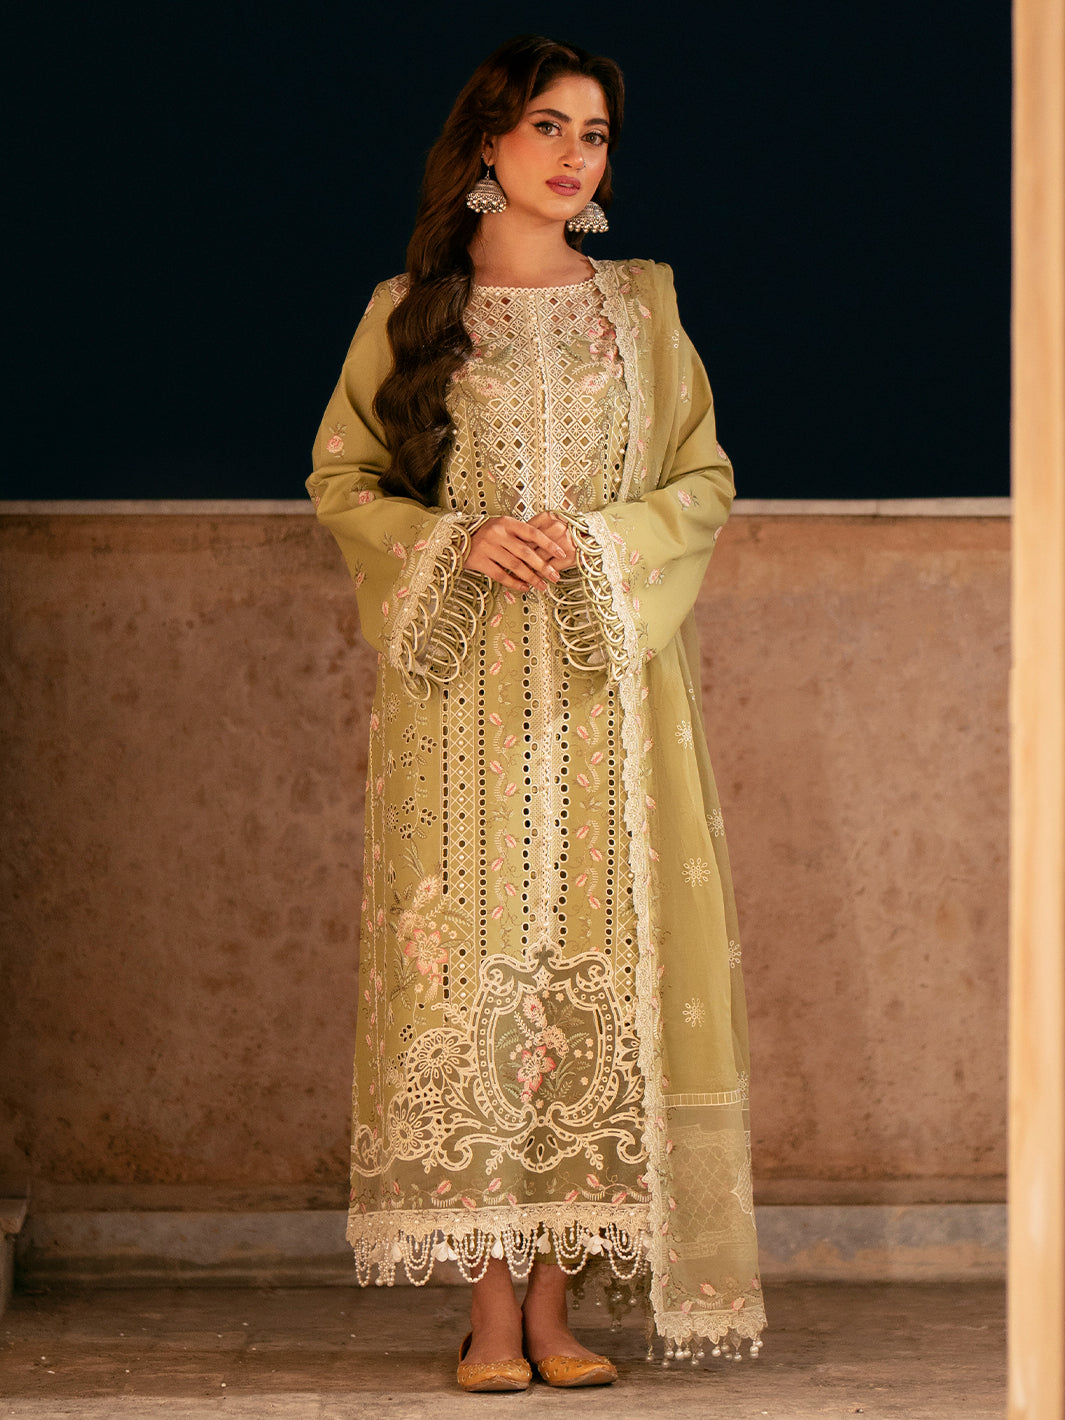 Binilyas's Dilbaro Embroidered Festive Lawn 24